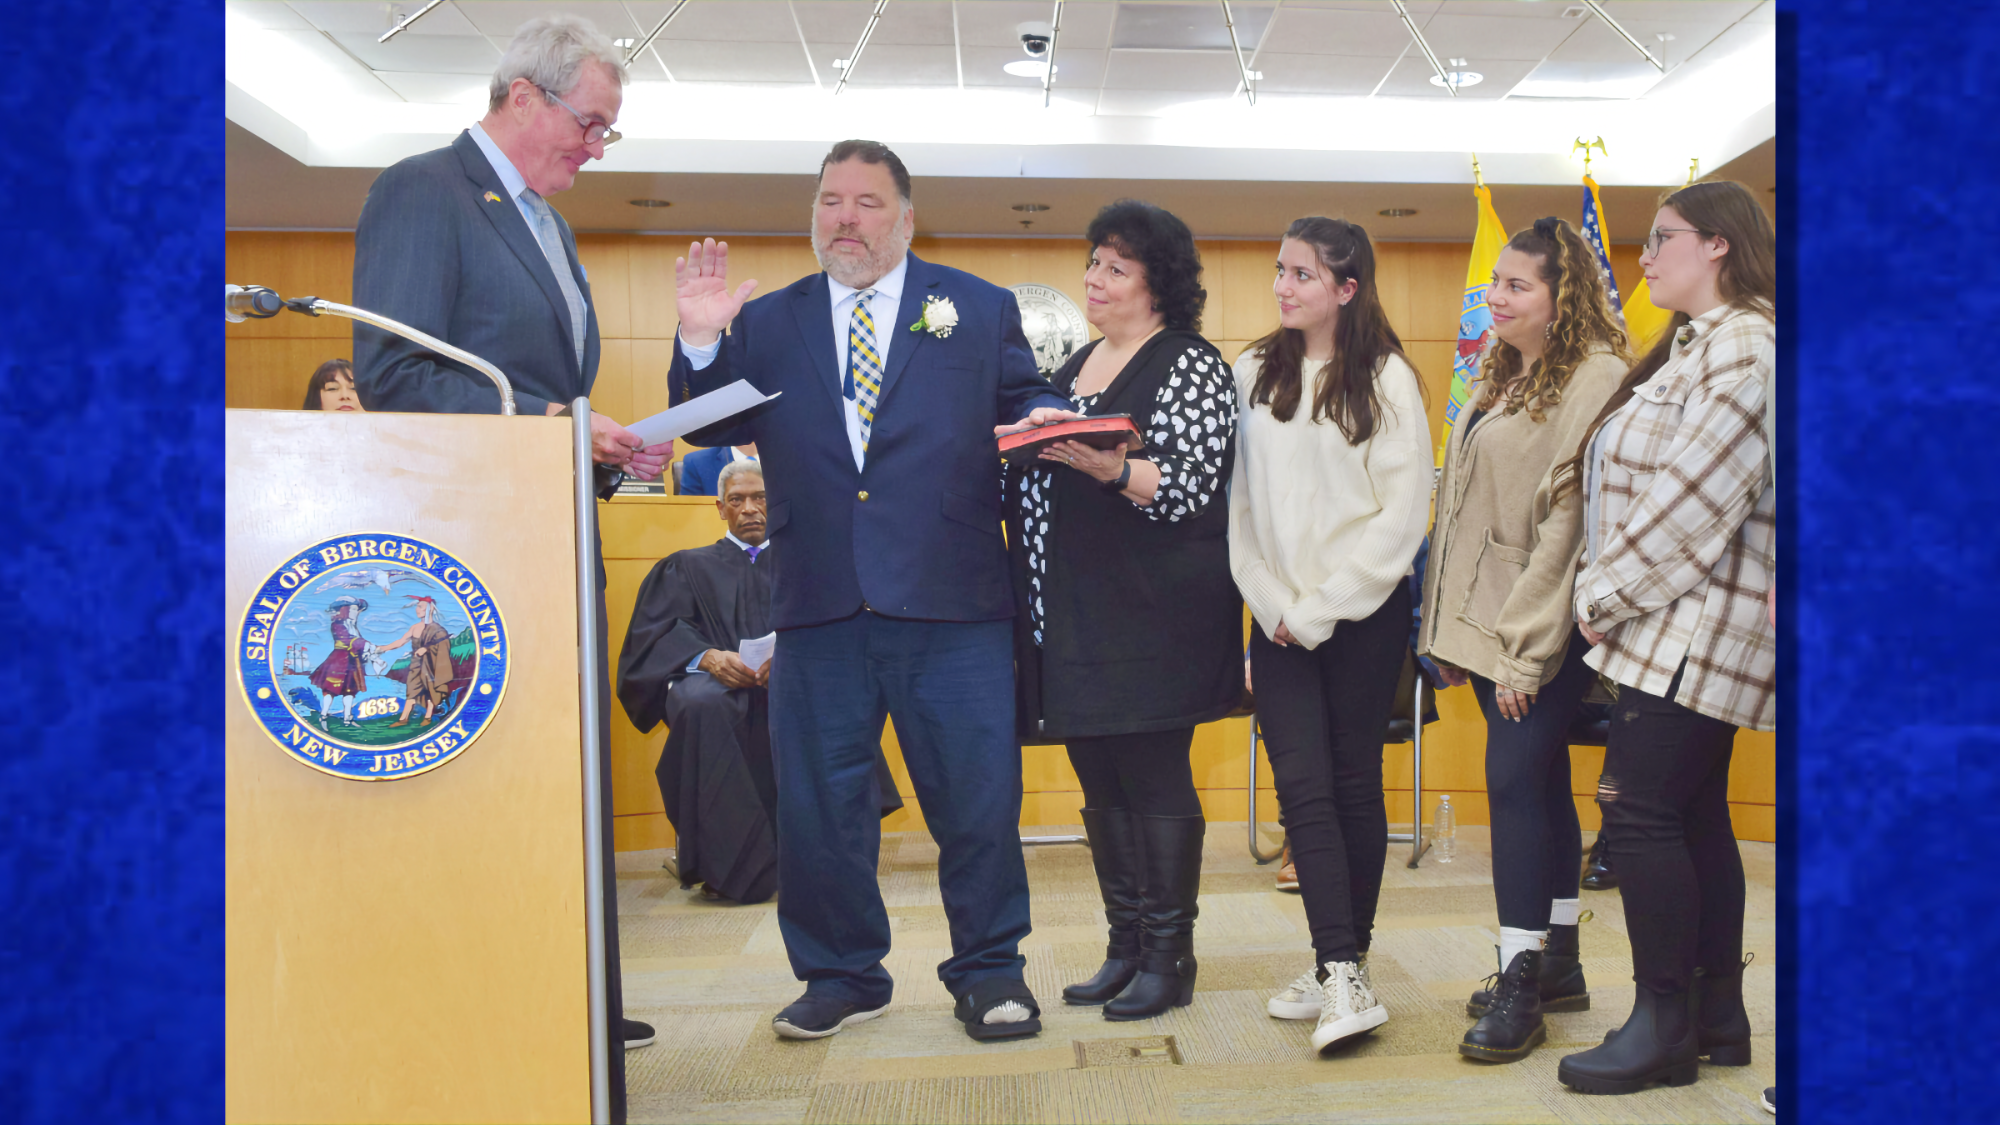 Seal Pack Girl Sex Video Very Hard - Labor leader Sullivan, of Montvale, elected to chair Bergen County Board of  Commissioners â€” Pascack Press & Northern Valley Press